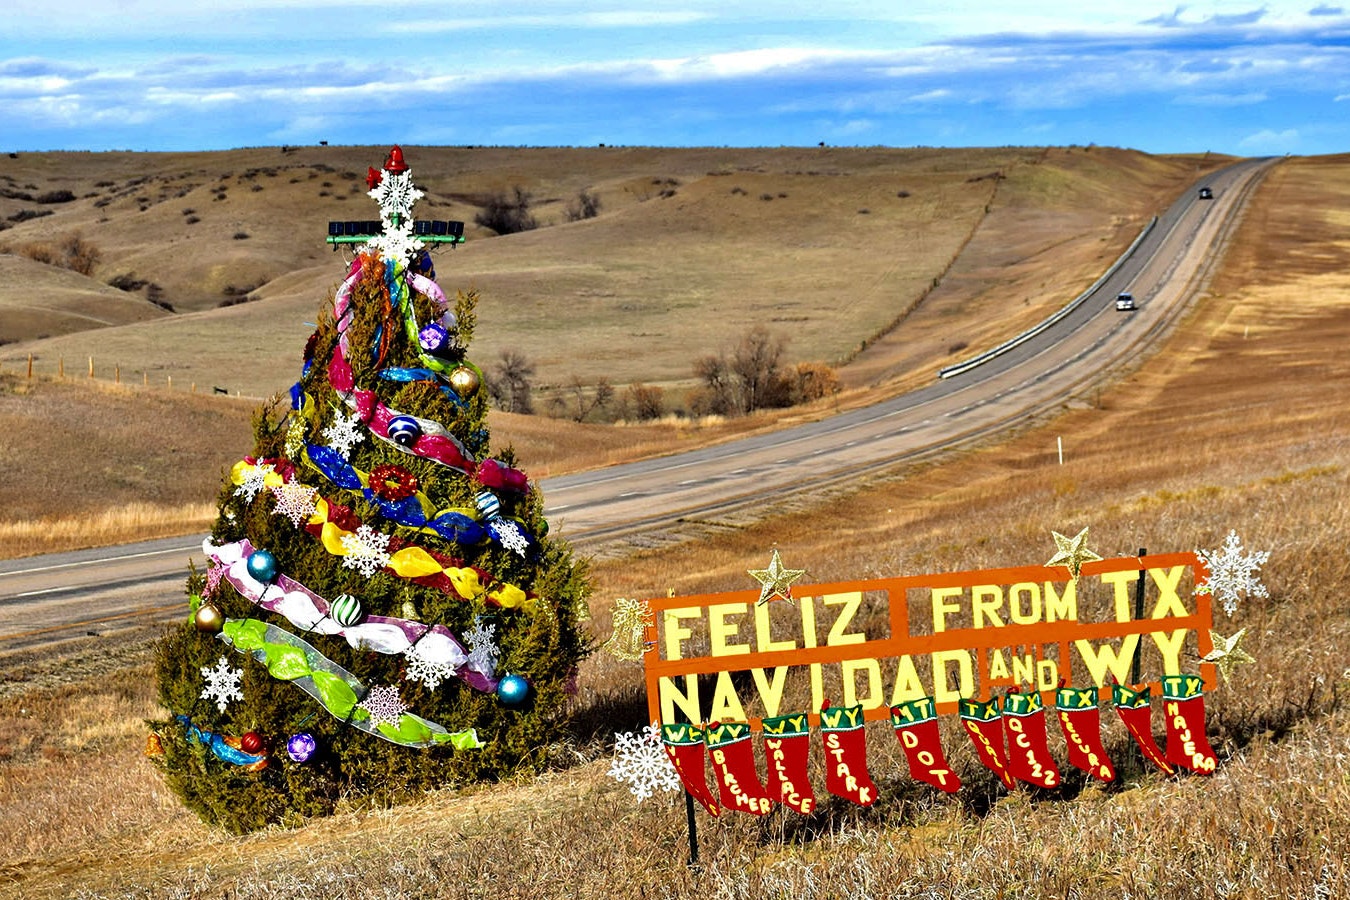 This lonely tree in the median of Interstate 90 between Sheridan, Wyoming, and Billings, Montana, on the Crow Reservation is the work of German Segura, a long-haul trucker from Texas who has stopped to decorate it for more than a dozen years.